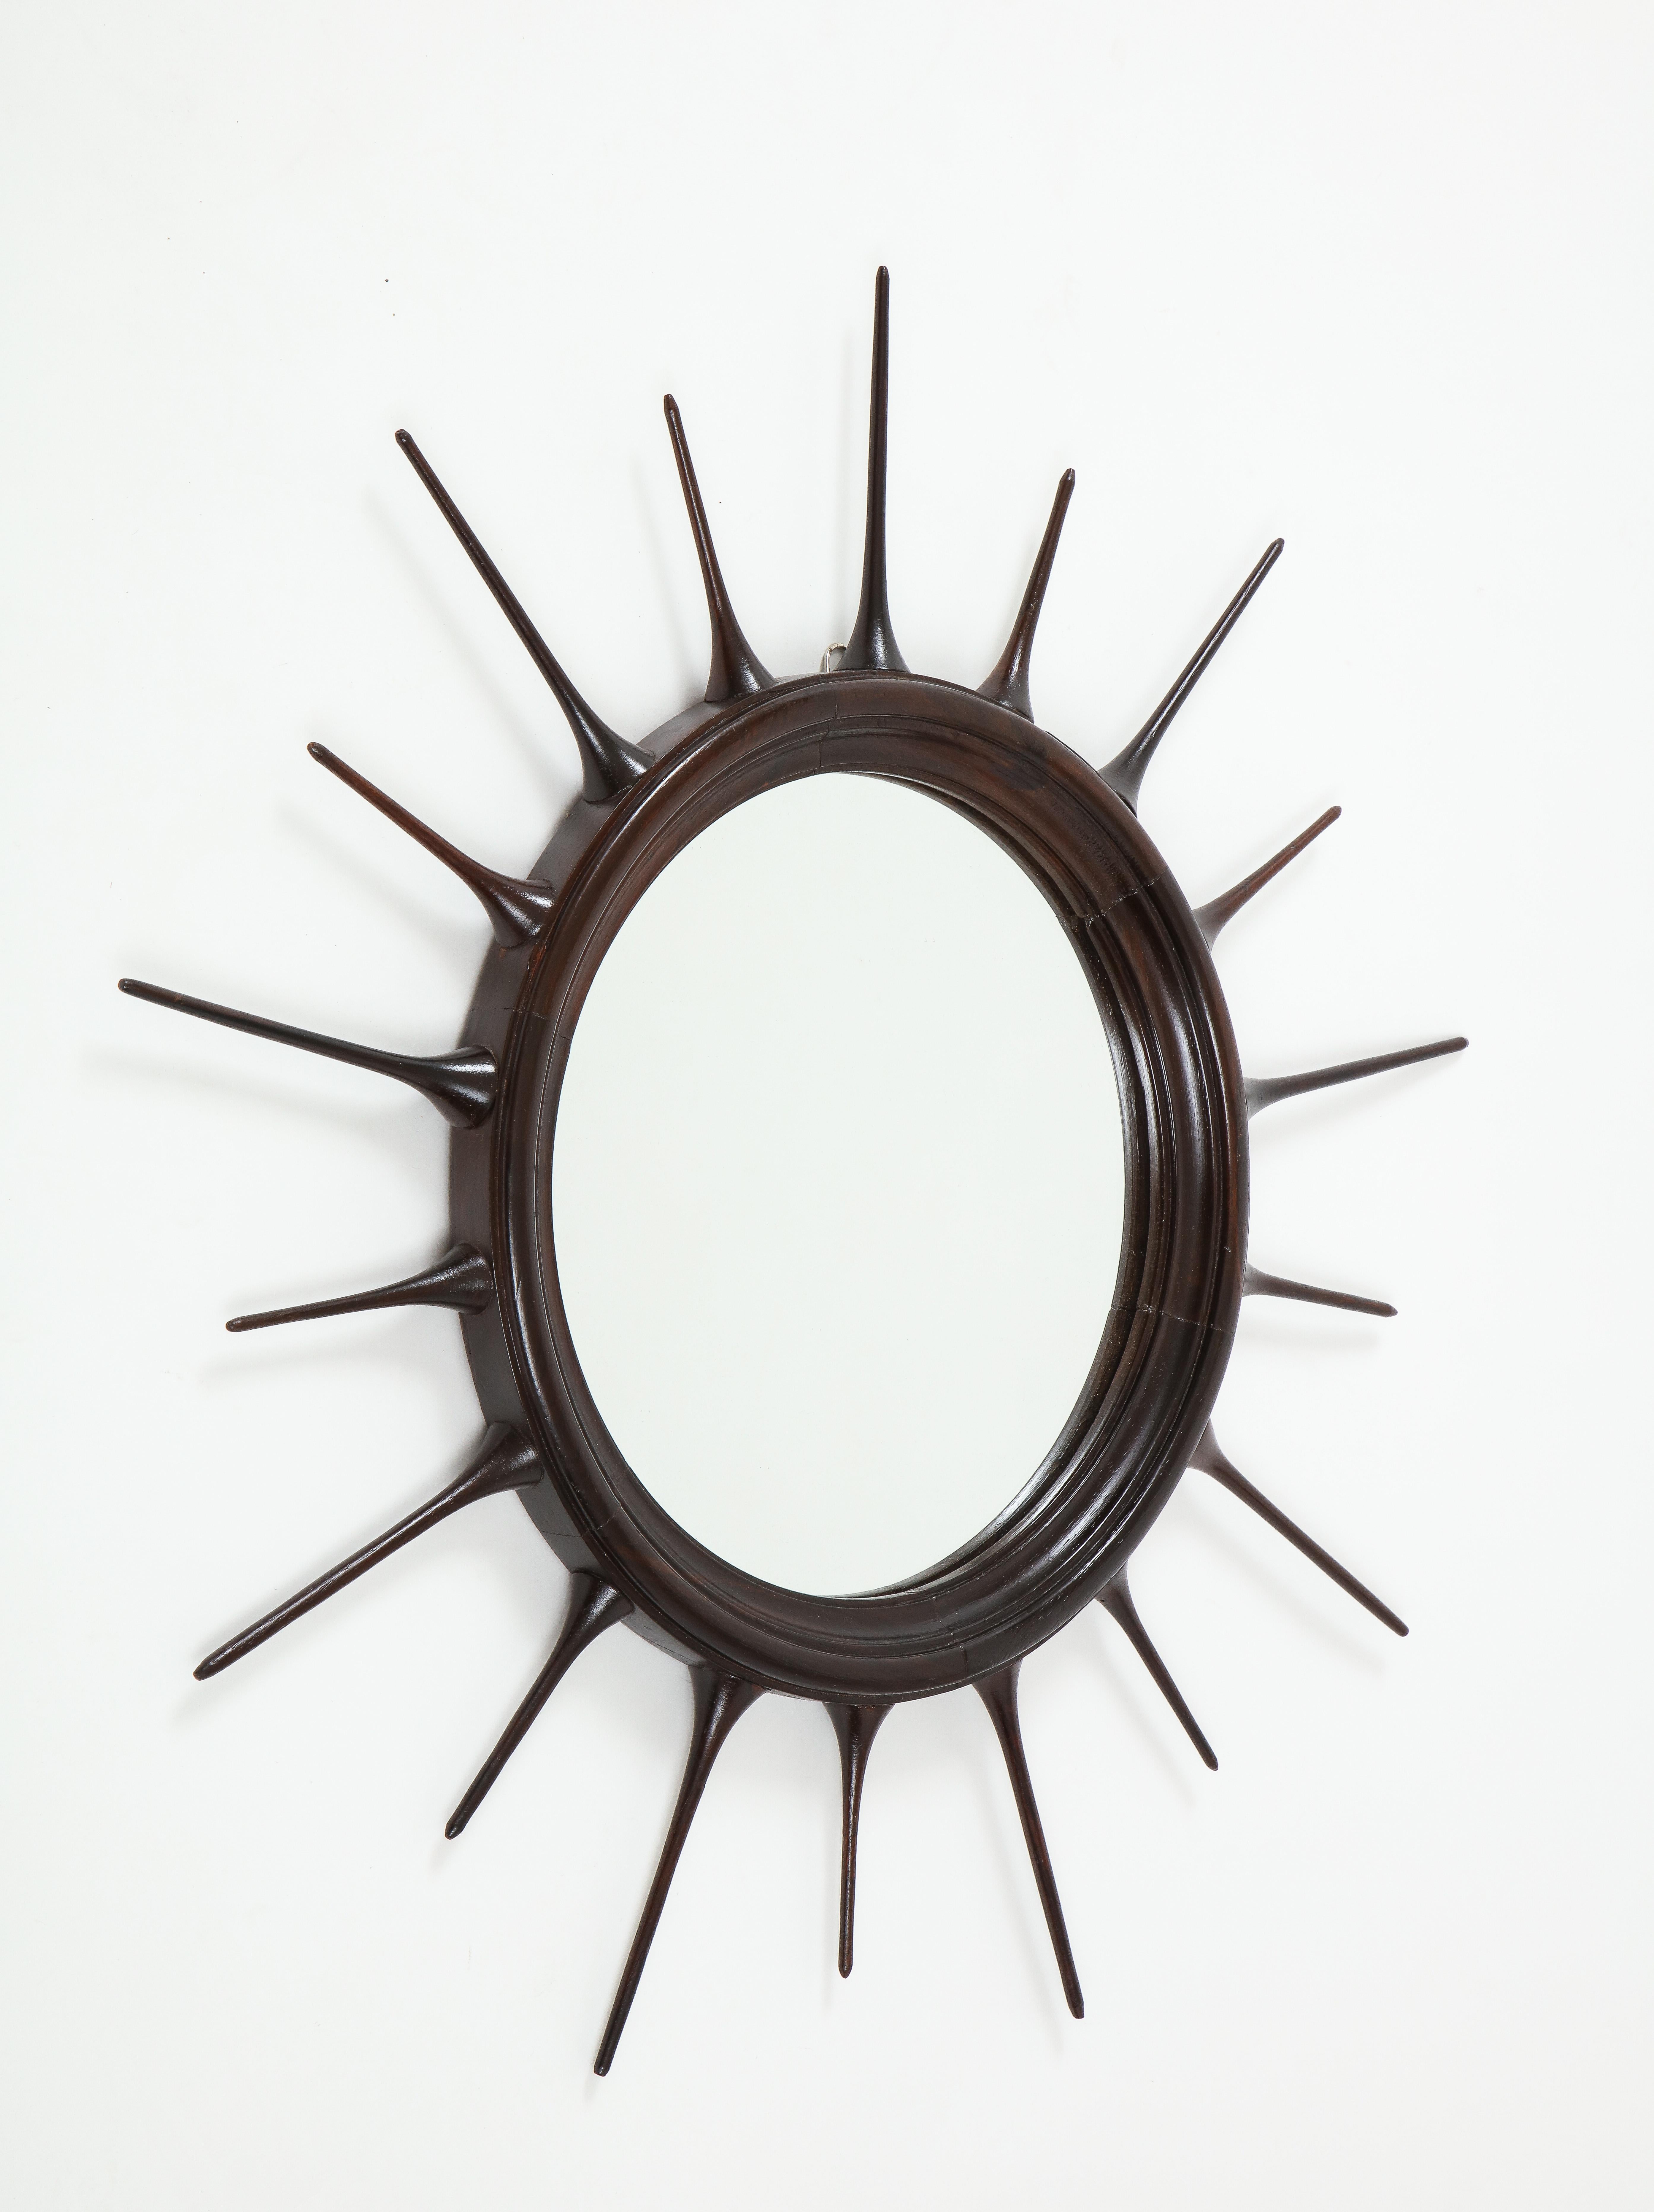 Mid-Century Modern wood sunburst mirror, Brazil, 1950s

1950s Brazilian Mid-Century Modern sunburst mirror, with finely crafted frame typical of the period. The frame is carved in solid wood with a simple yet elegant radial pattern, finished with